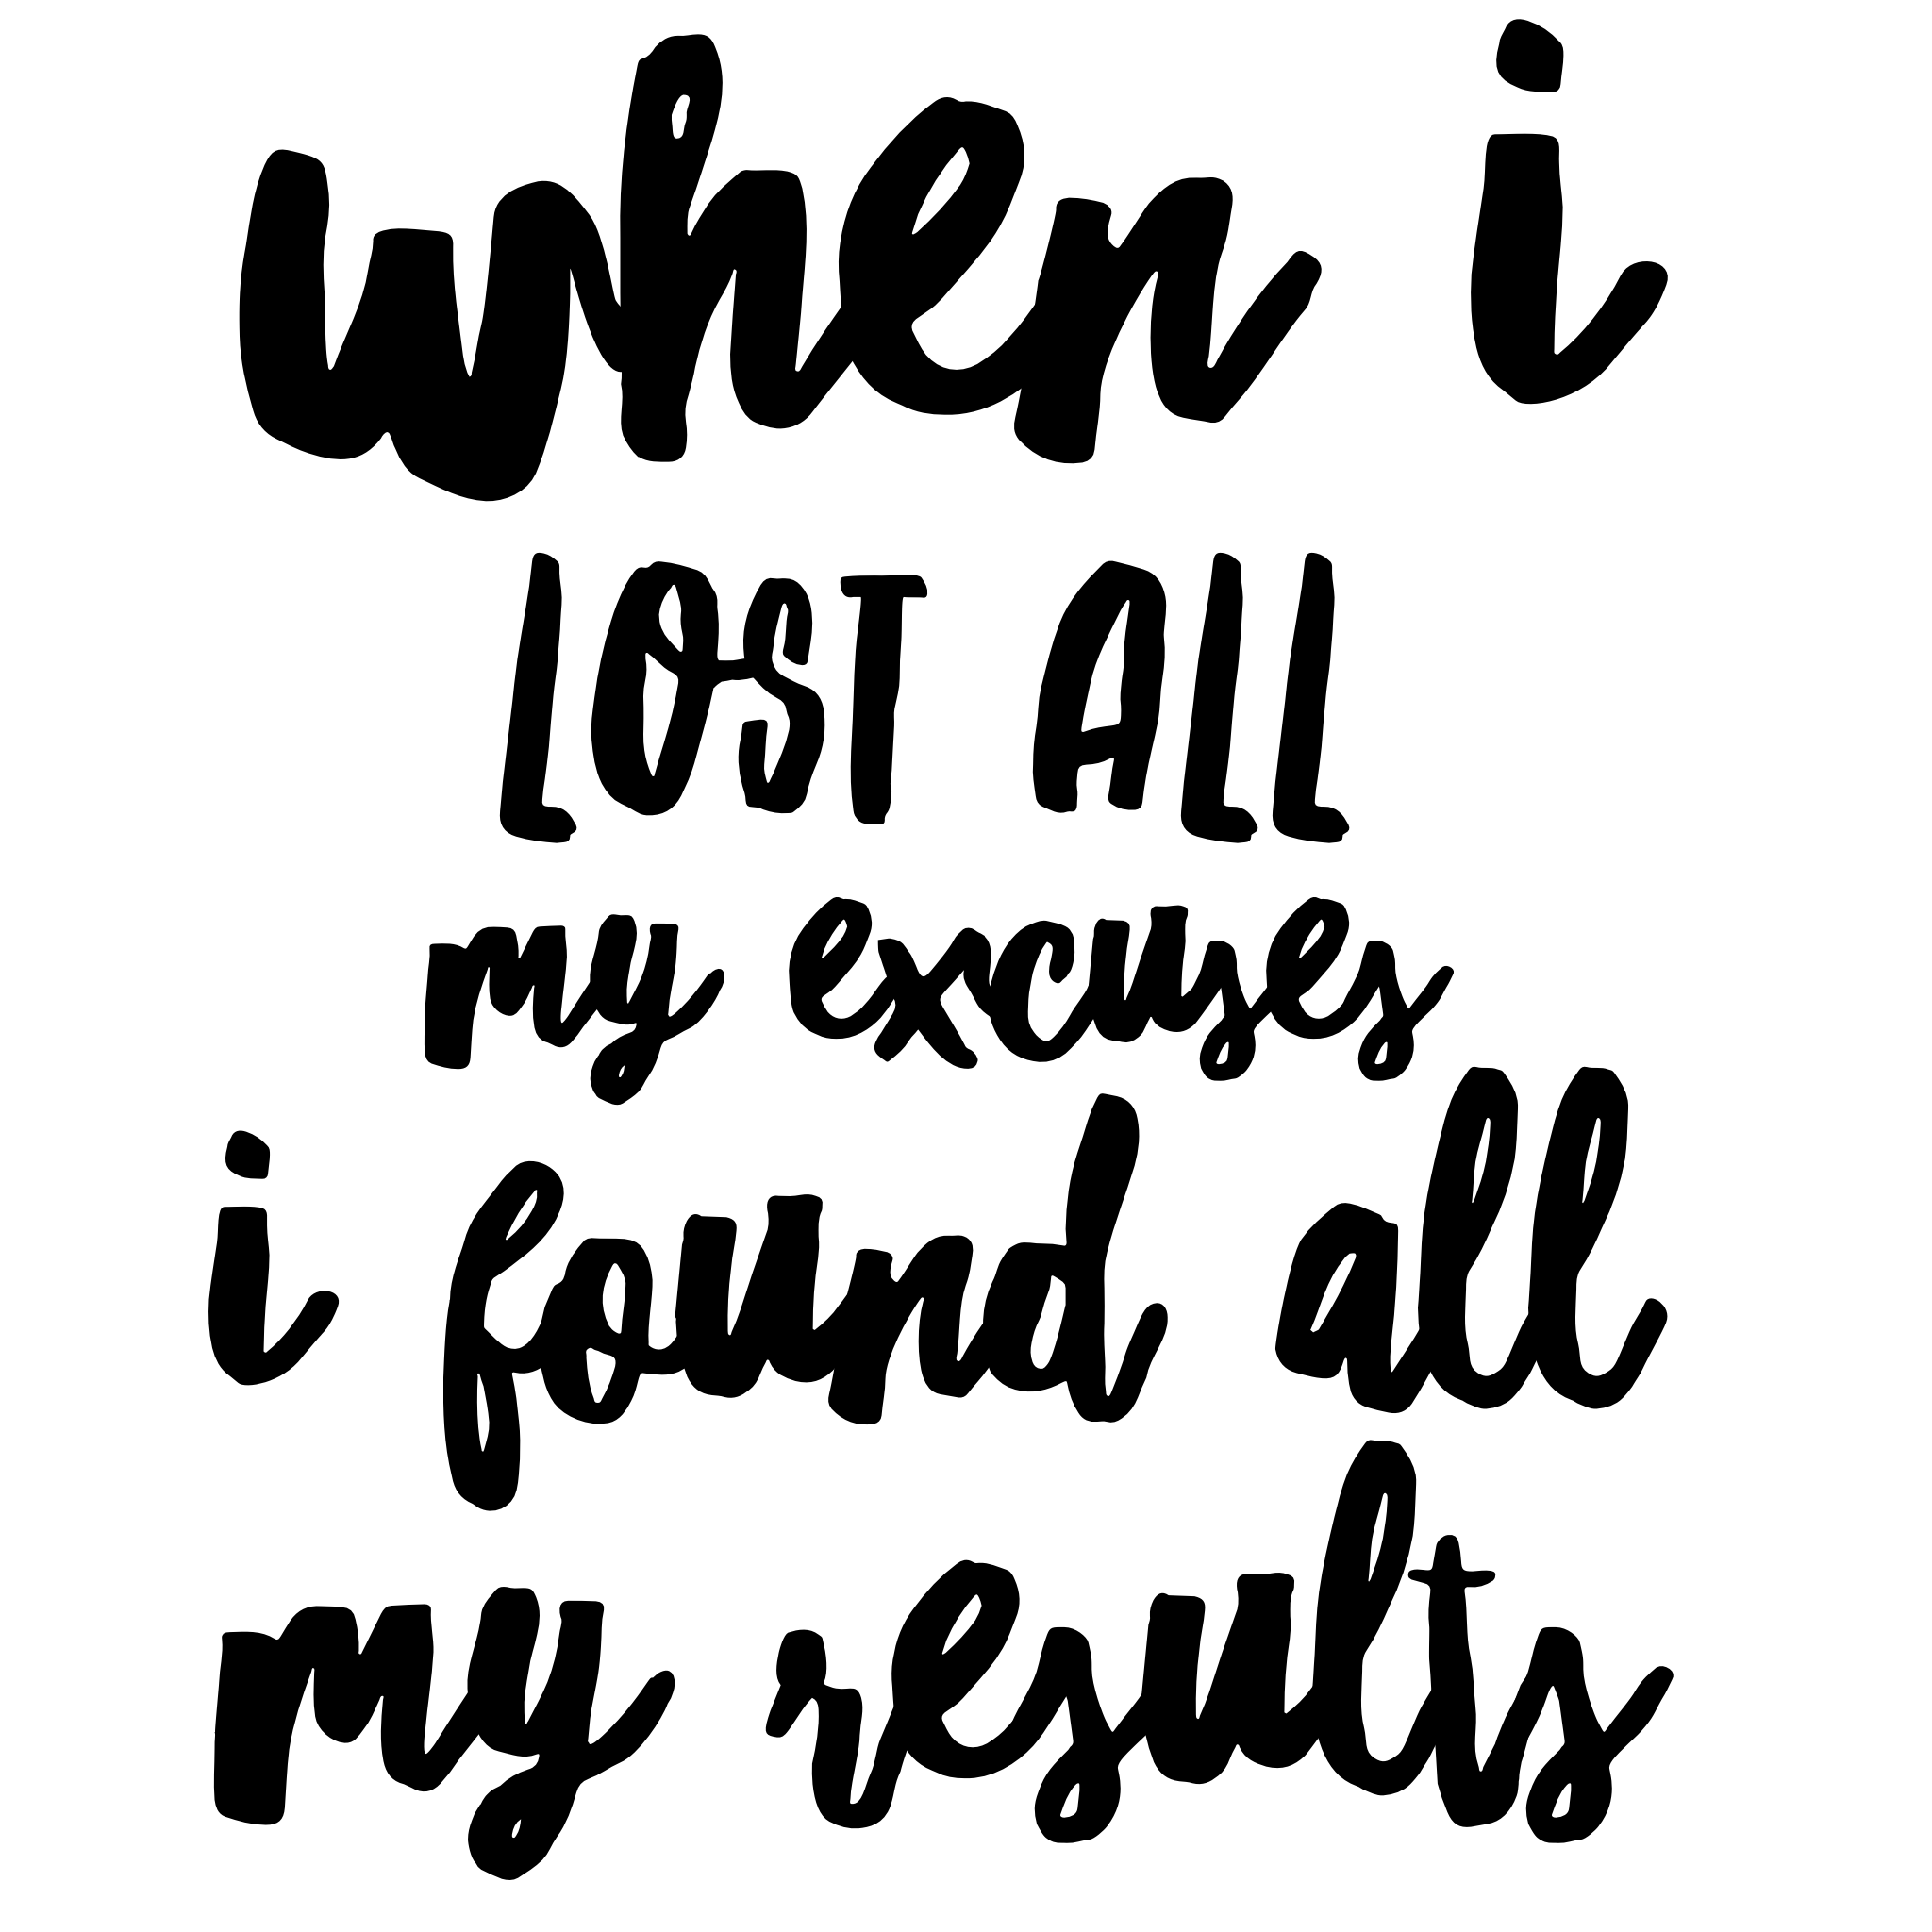 i lost my excuses when I found my results